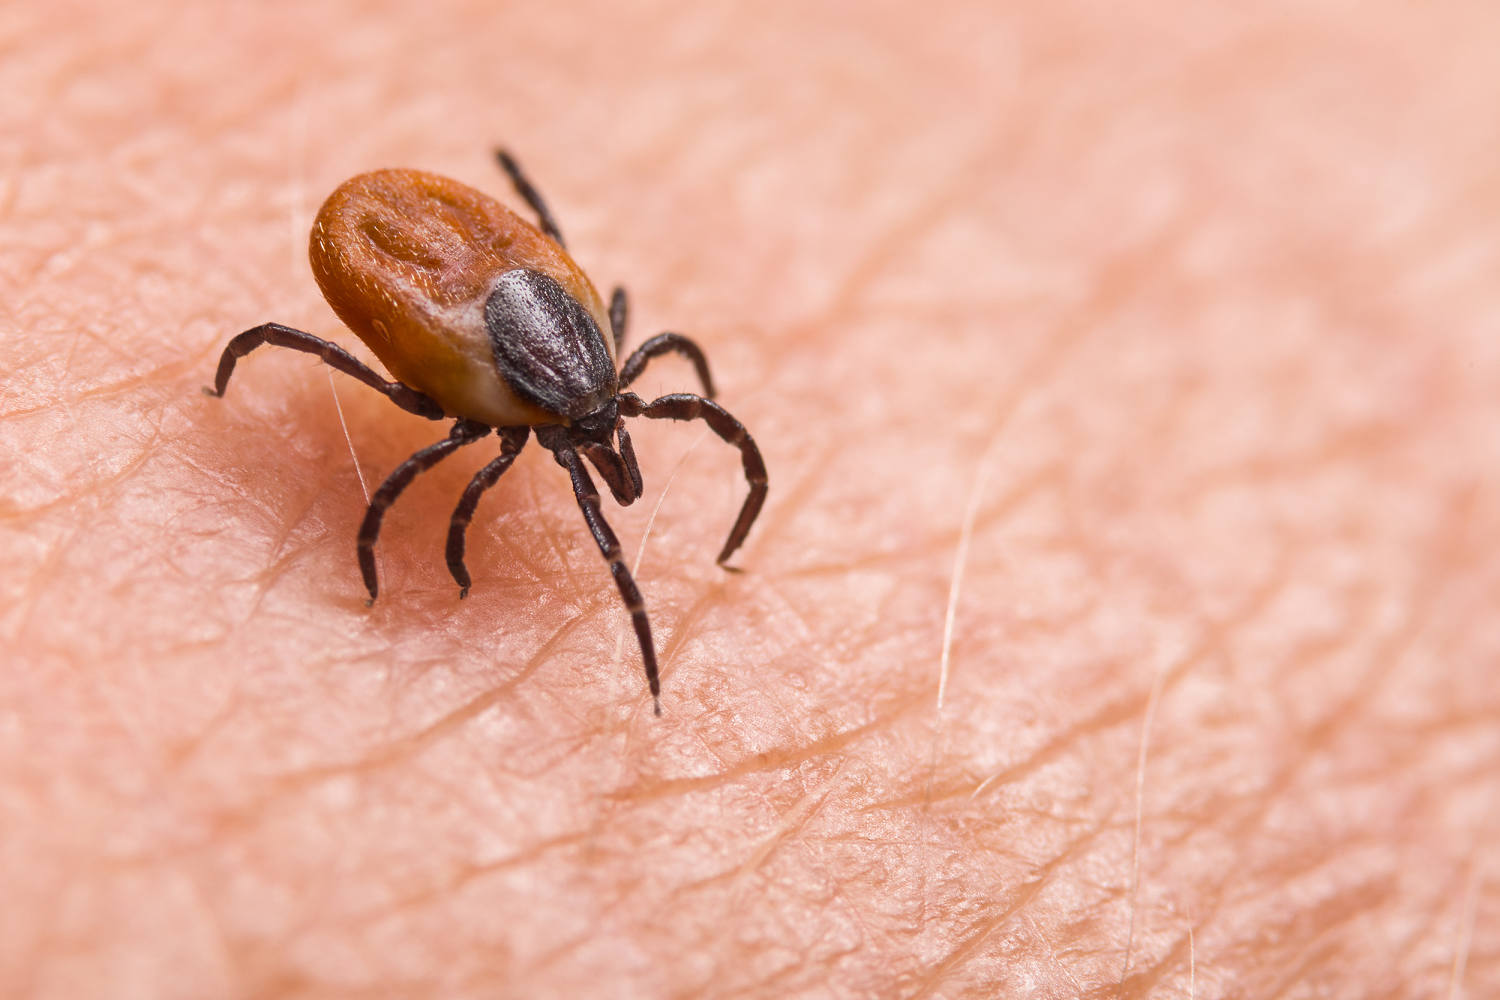 Warmer winters mean more tick bites and Lyme disease risk year-round